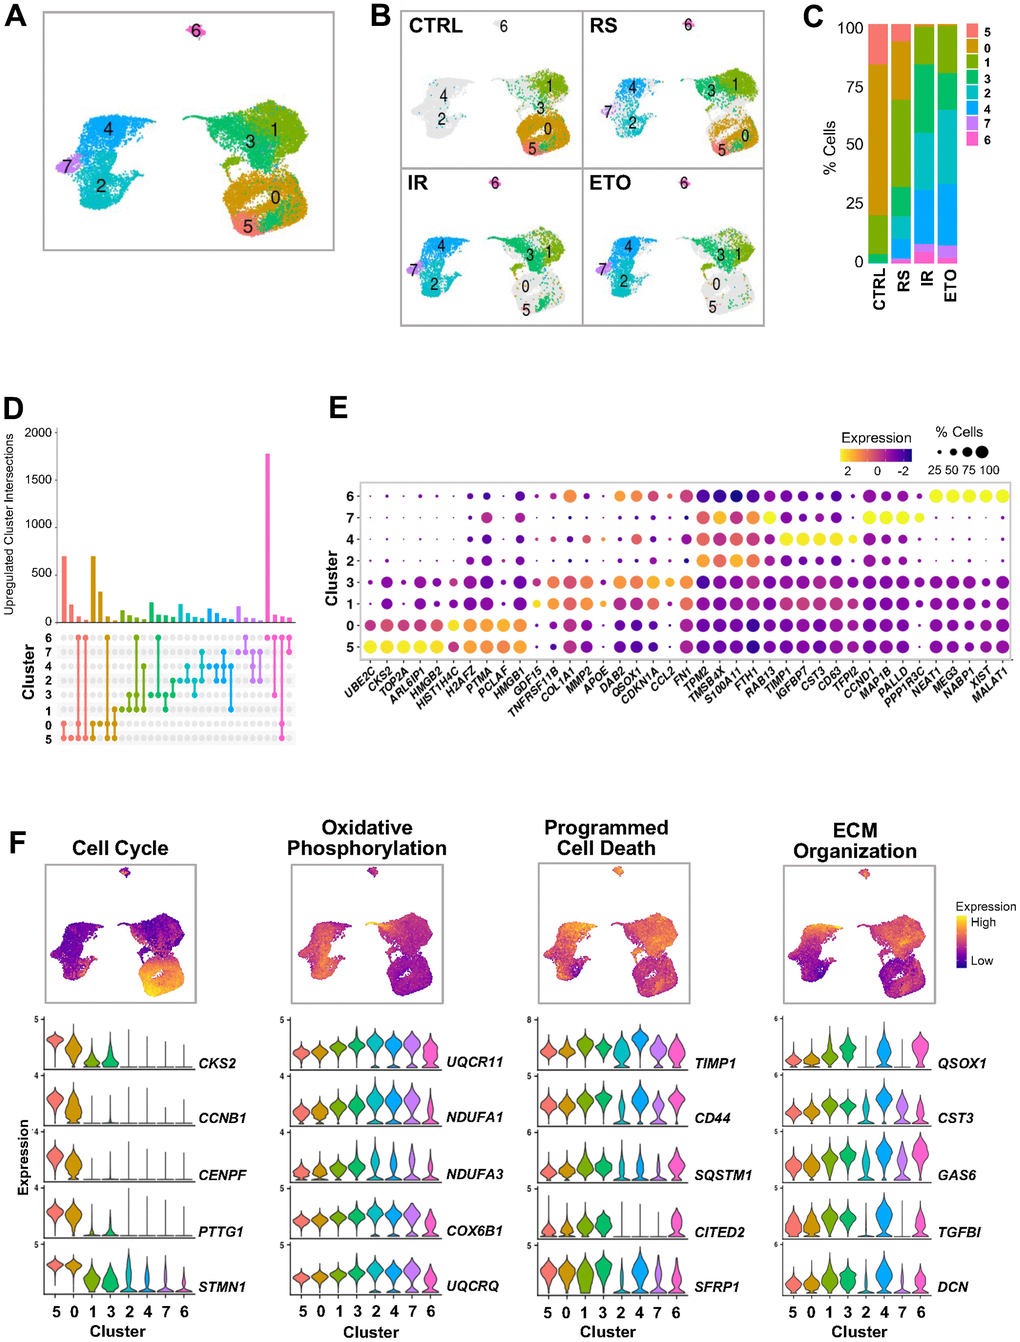 Clustering analysis of integrated single-cell senescence models. (A) UMAP illustrating the cell clusters with different gene expression profiles, distinguished by unsupervised clustering of integrated samples from Figure 1. (B) Distribution of cell clusters from (A) in each sample analyzed. (C) Percent composition of cell clusters from (B) in each sample. (D) Overlap of upregulated RNA sets among clusters. Set size: number of upregulated RNAs in each cluster. Each column shows number of genes encoding RNAs that are either unique for one cluster (single dot) or shared by clusters (dots connected by lines). (E) Top highest expressed marker RNAs in each cluster. Dot color represents average gene expression levels scaled across all clusters, and dot size indicates percentage of cells expressing specific gene in each cluster. Clusters are ordered by similarity of the transcriptomes in (A). (F) Select GO terms of GSEA performed for each cluster (Supplementary Figure 1B). Cells are colored by gene expression signature scores of indicated GO terms assessed for each cell and presented in UMAP space (top). Violin plots show expression levels of RNAs from top genes contributing to scoring across all clusters (bottom).